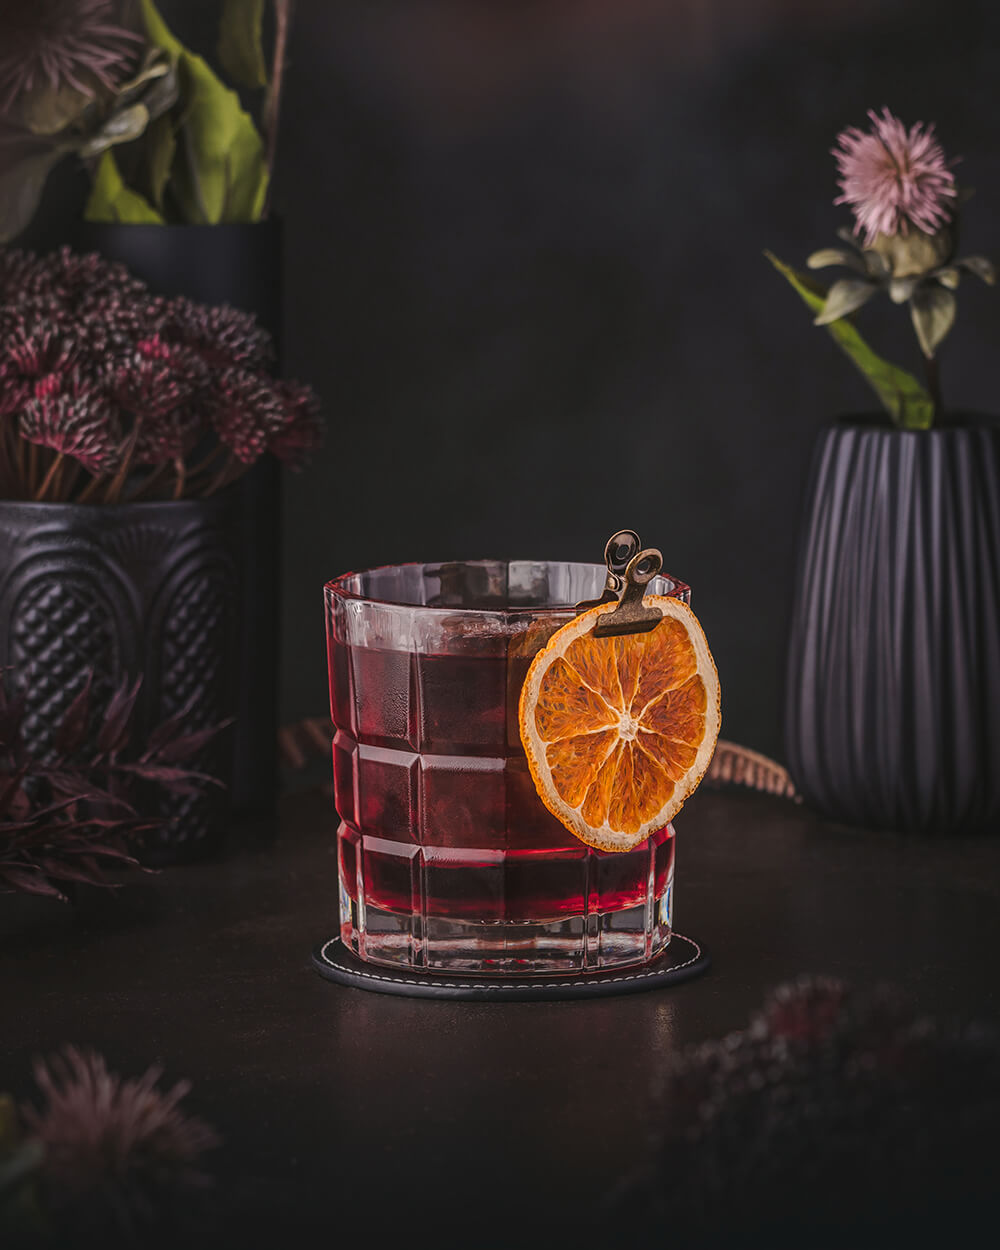 Kingston Negroni - Deep red Negroni twist made with Jamaican rum. garnished with an orange wheel.